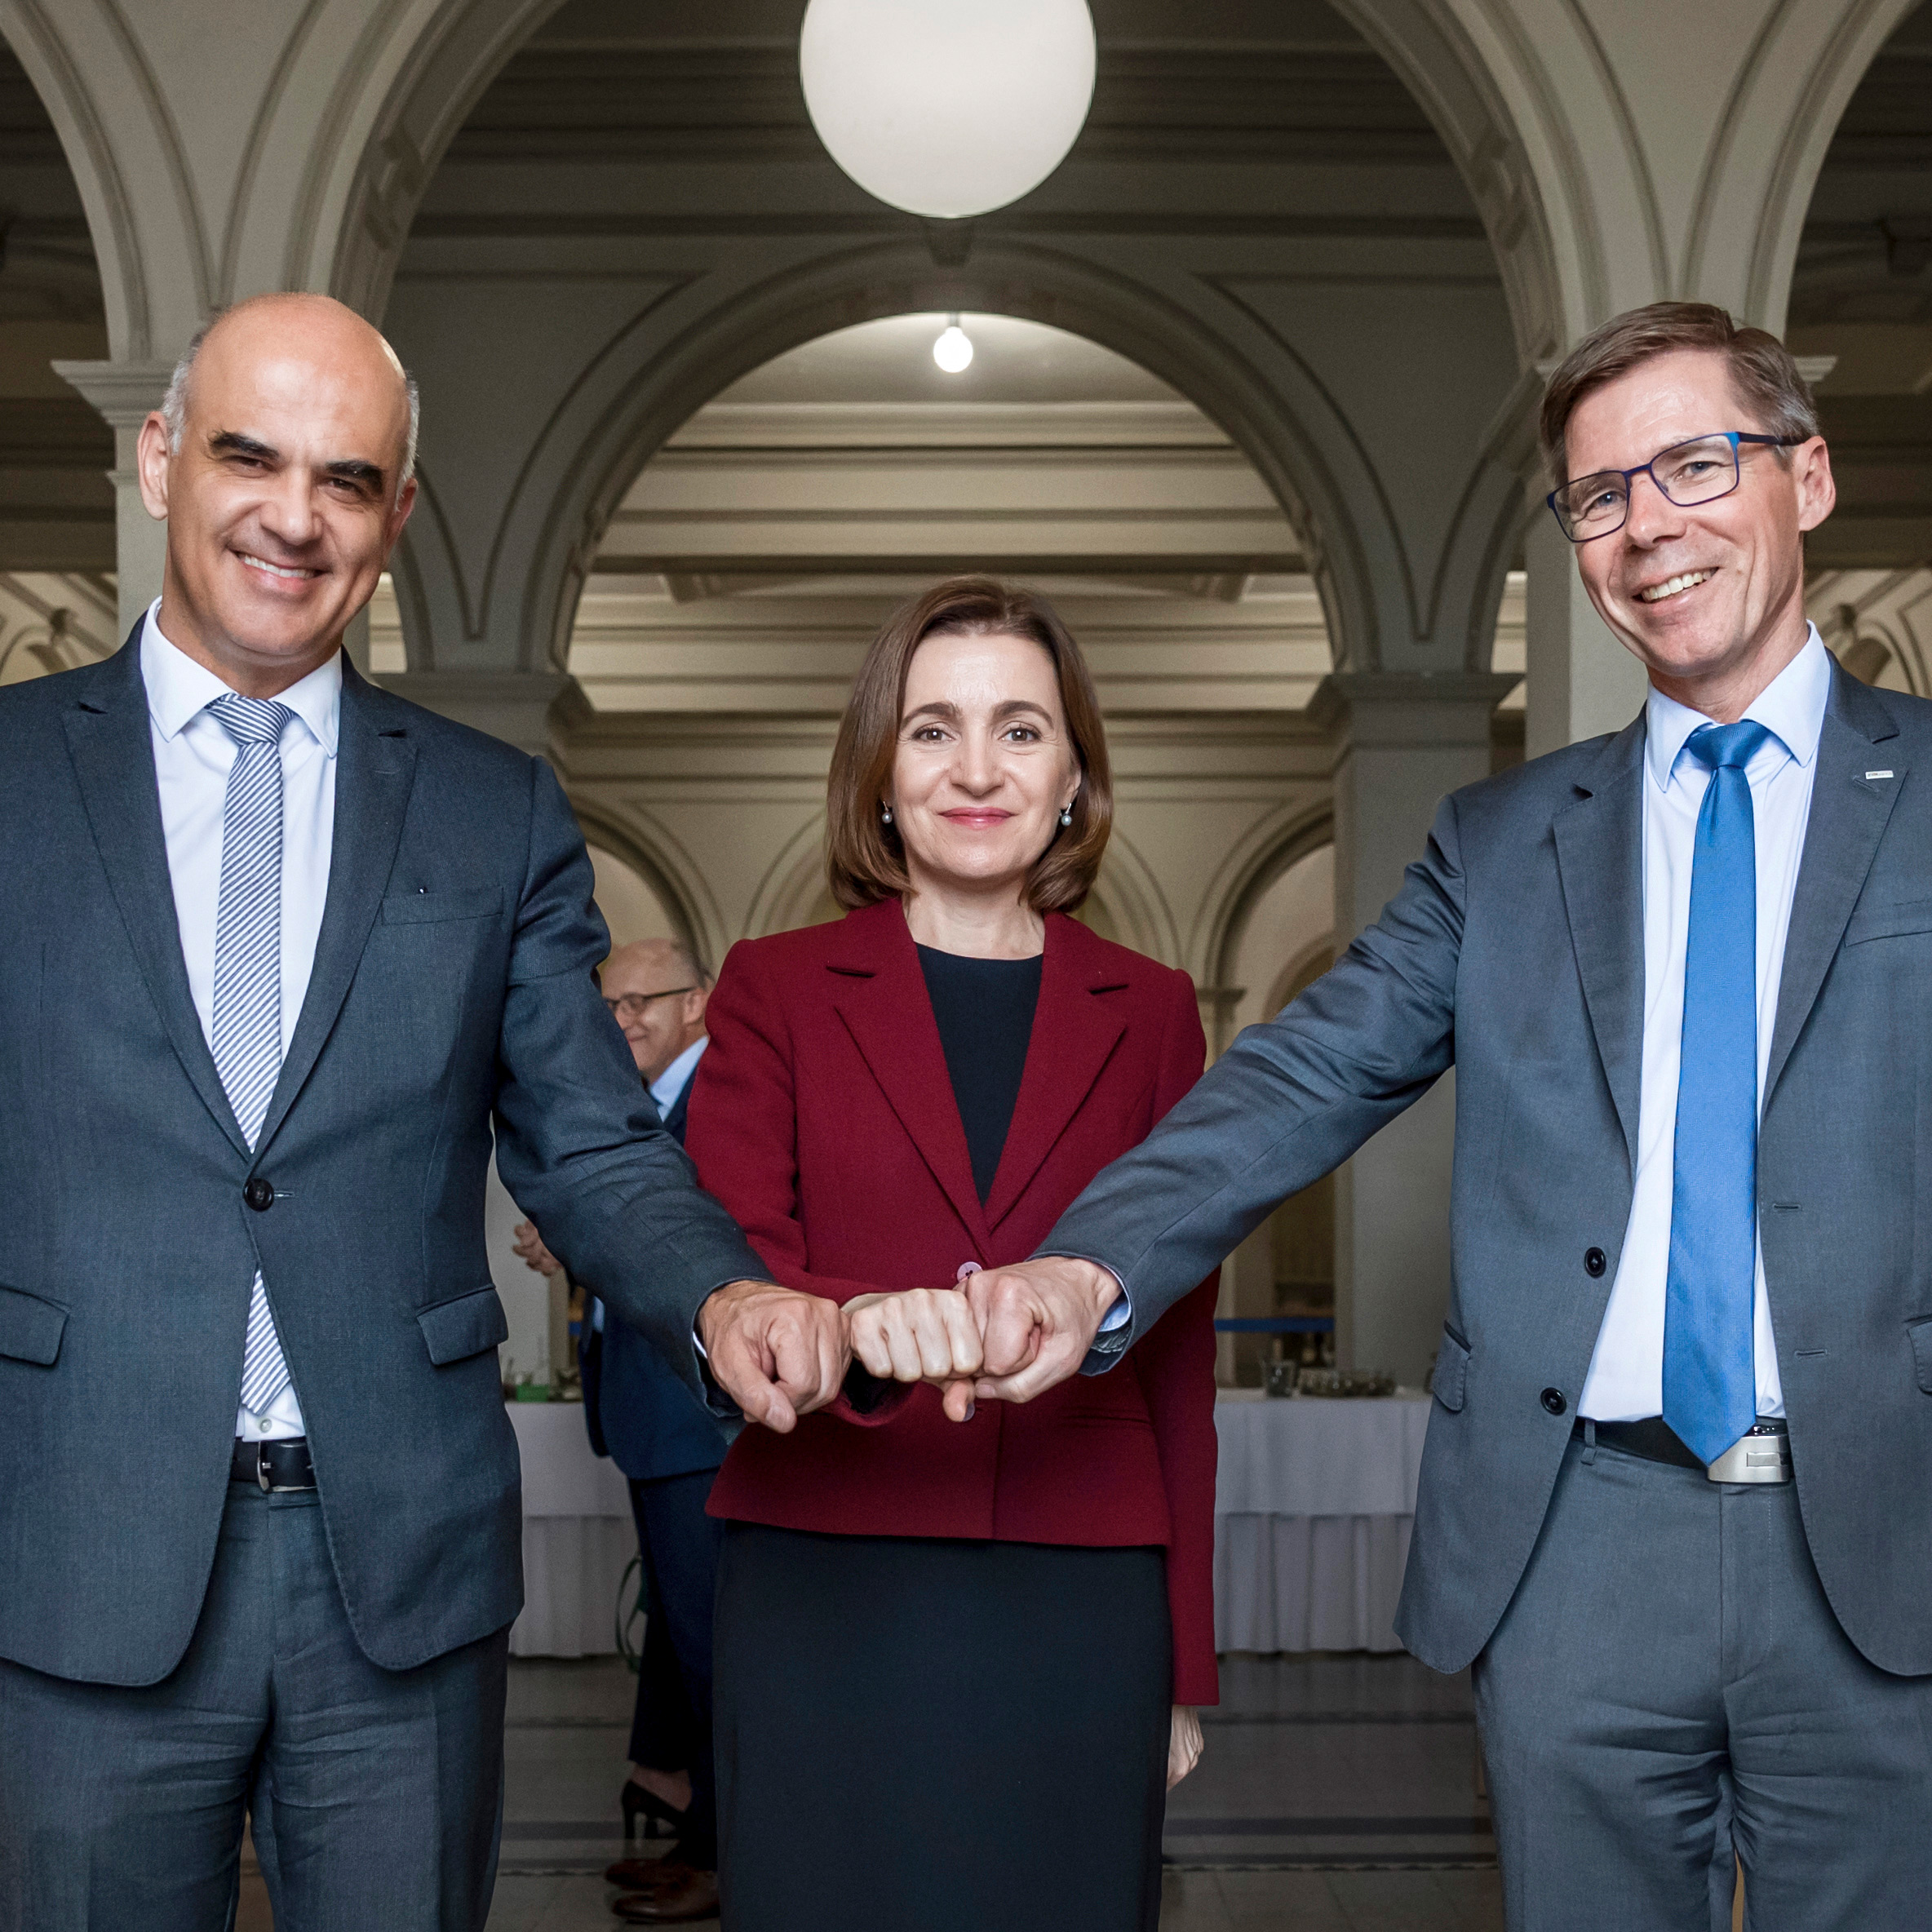 Enlarged view: Alain Berset (left), Maia Sandu and ETH President Joël Mesot (right) shaking hands.